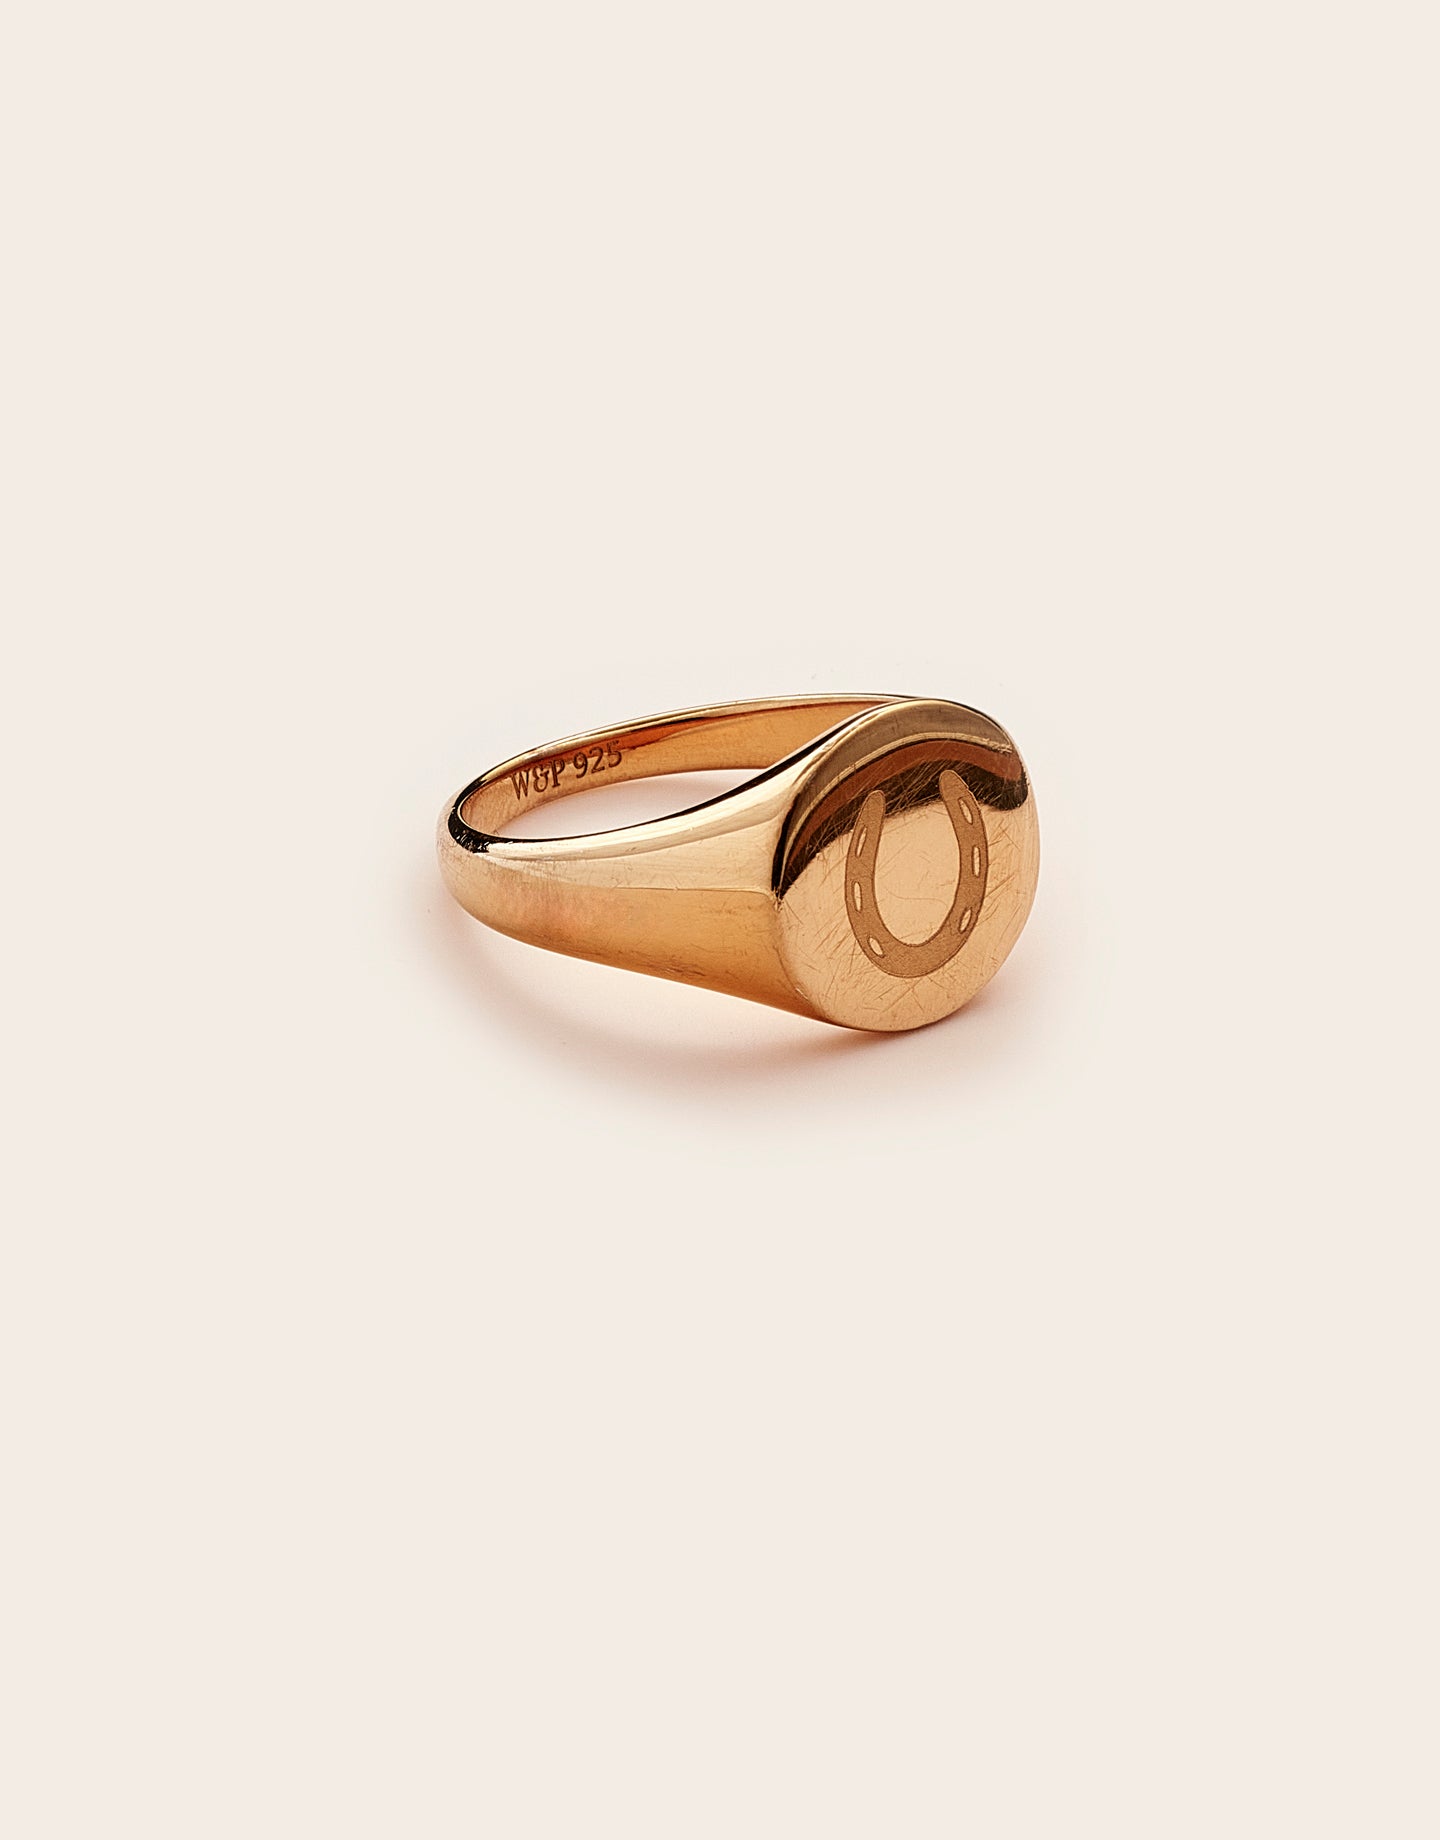 Trusty Steed Signet Ring Gold